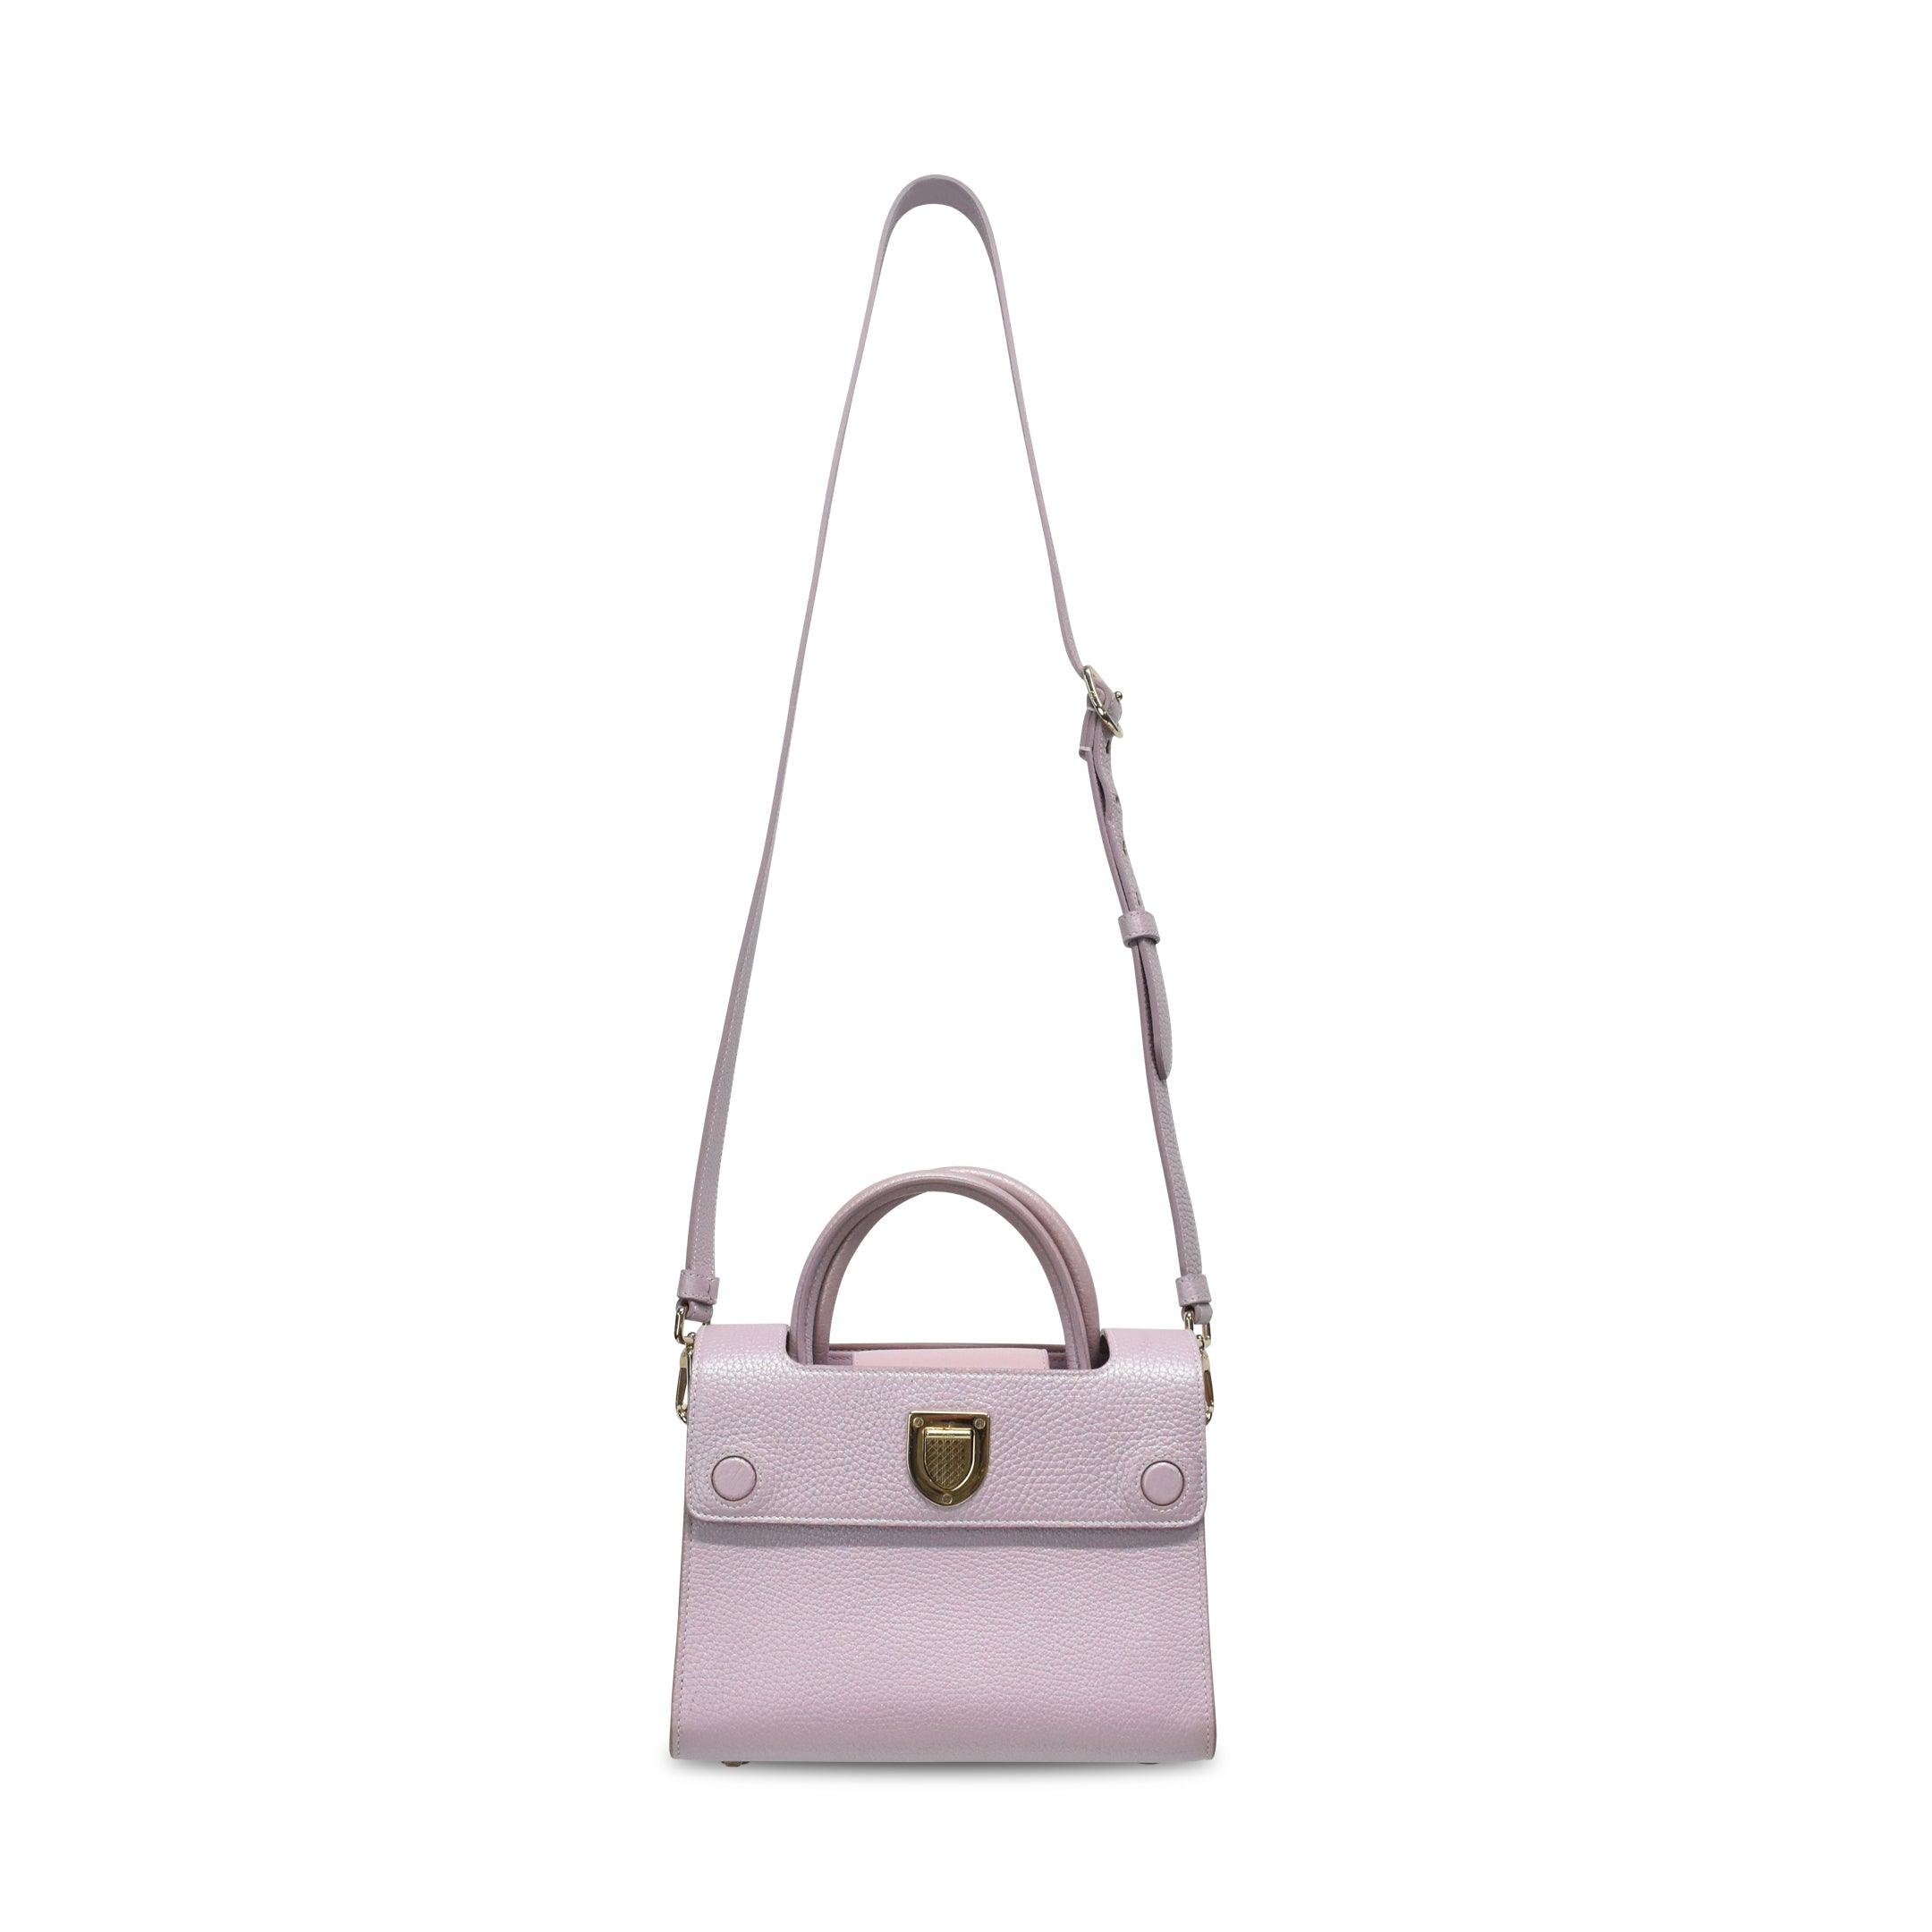 Christian Dior 'Diorever' Bag - Fashionably Yours